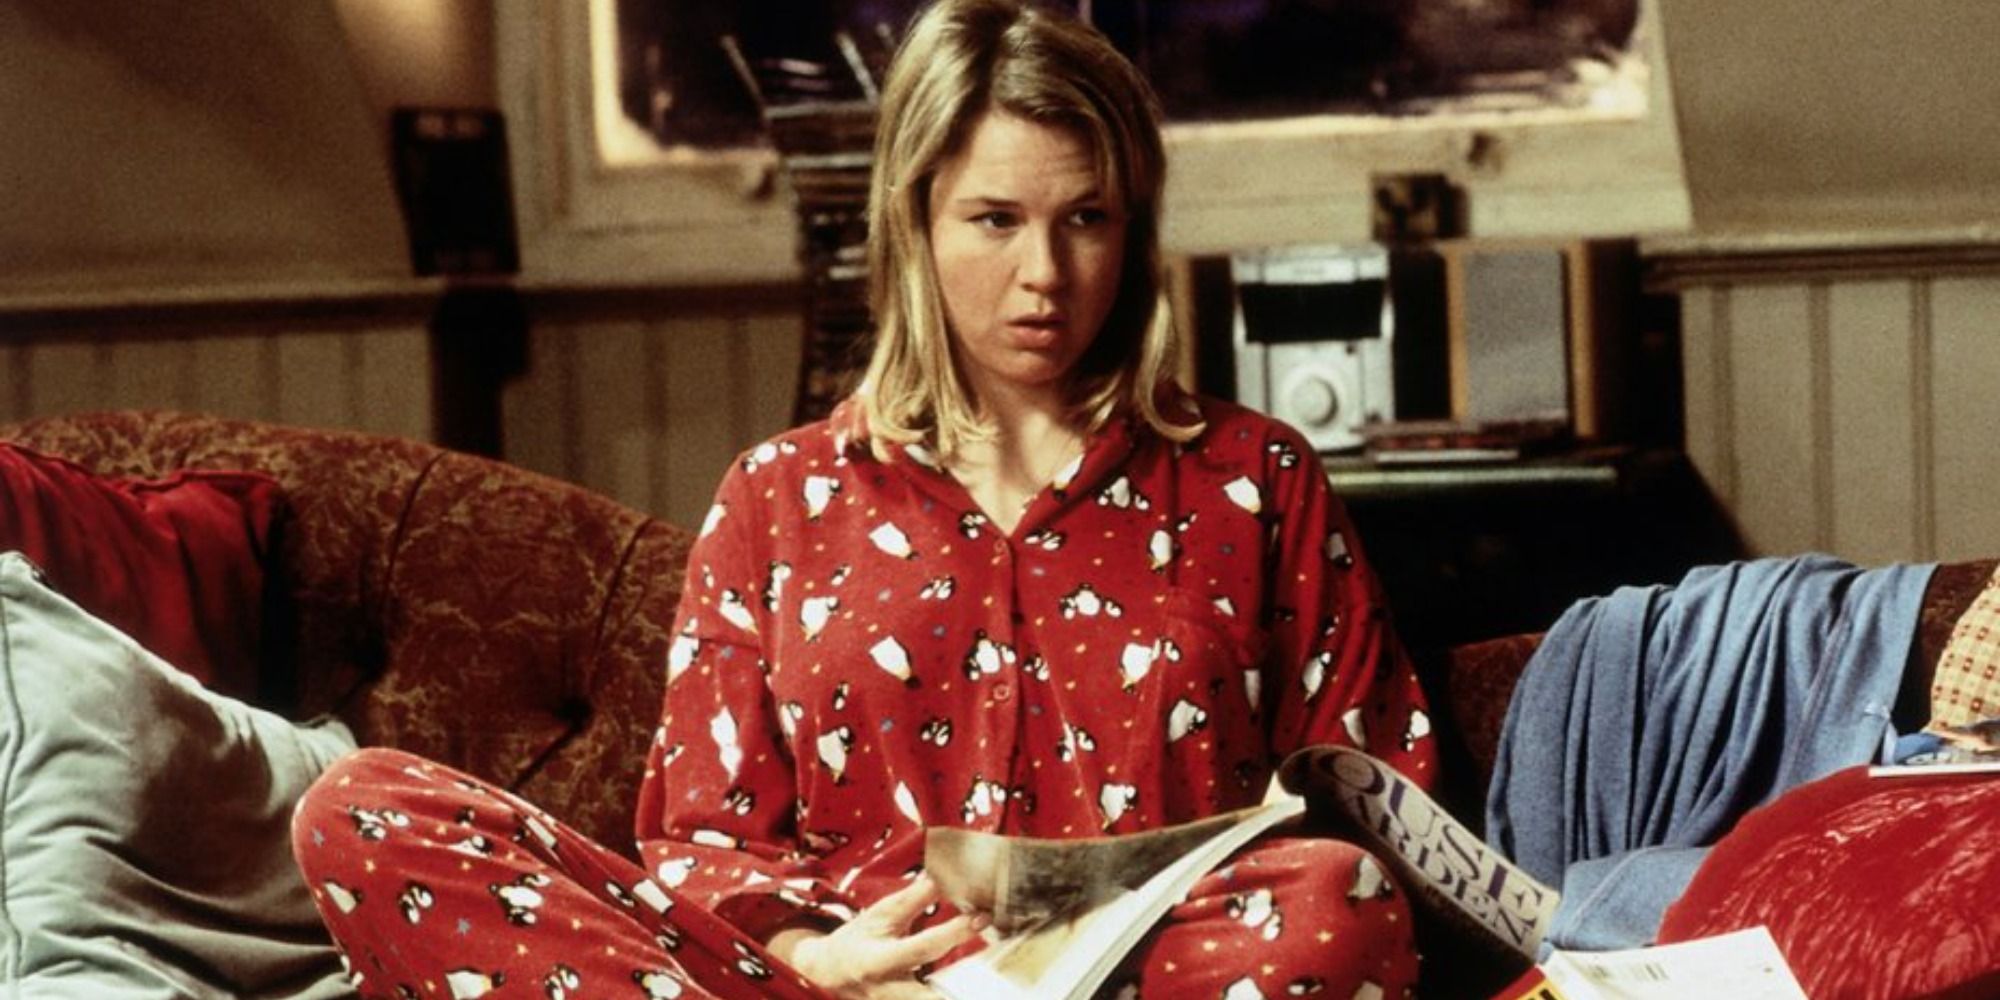 Rene Zellweger in her pyjamas looking confused on the couch 